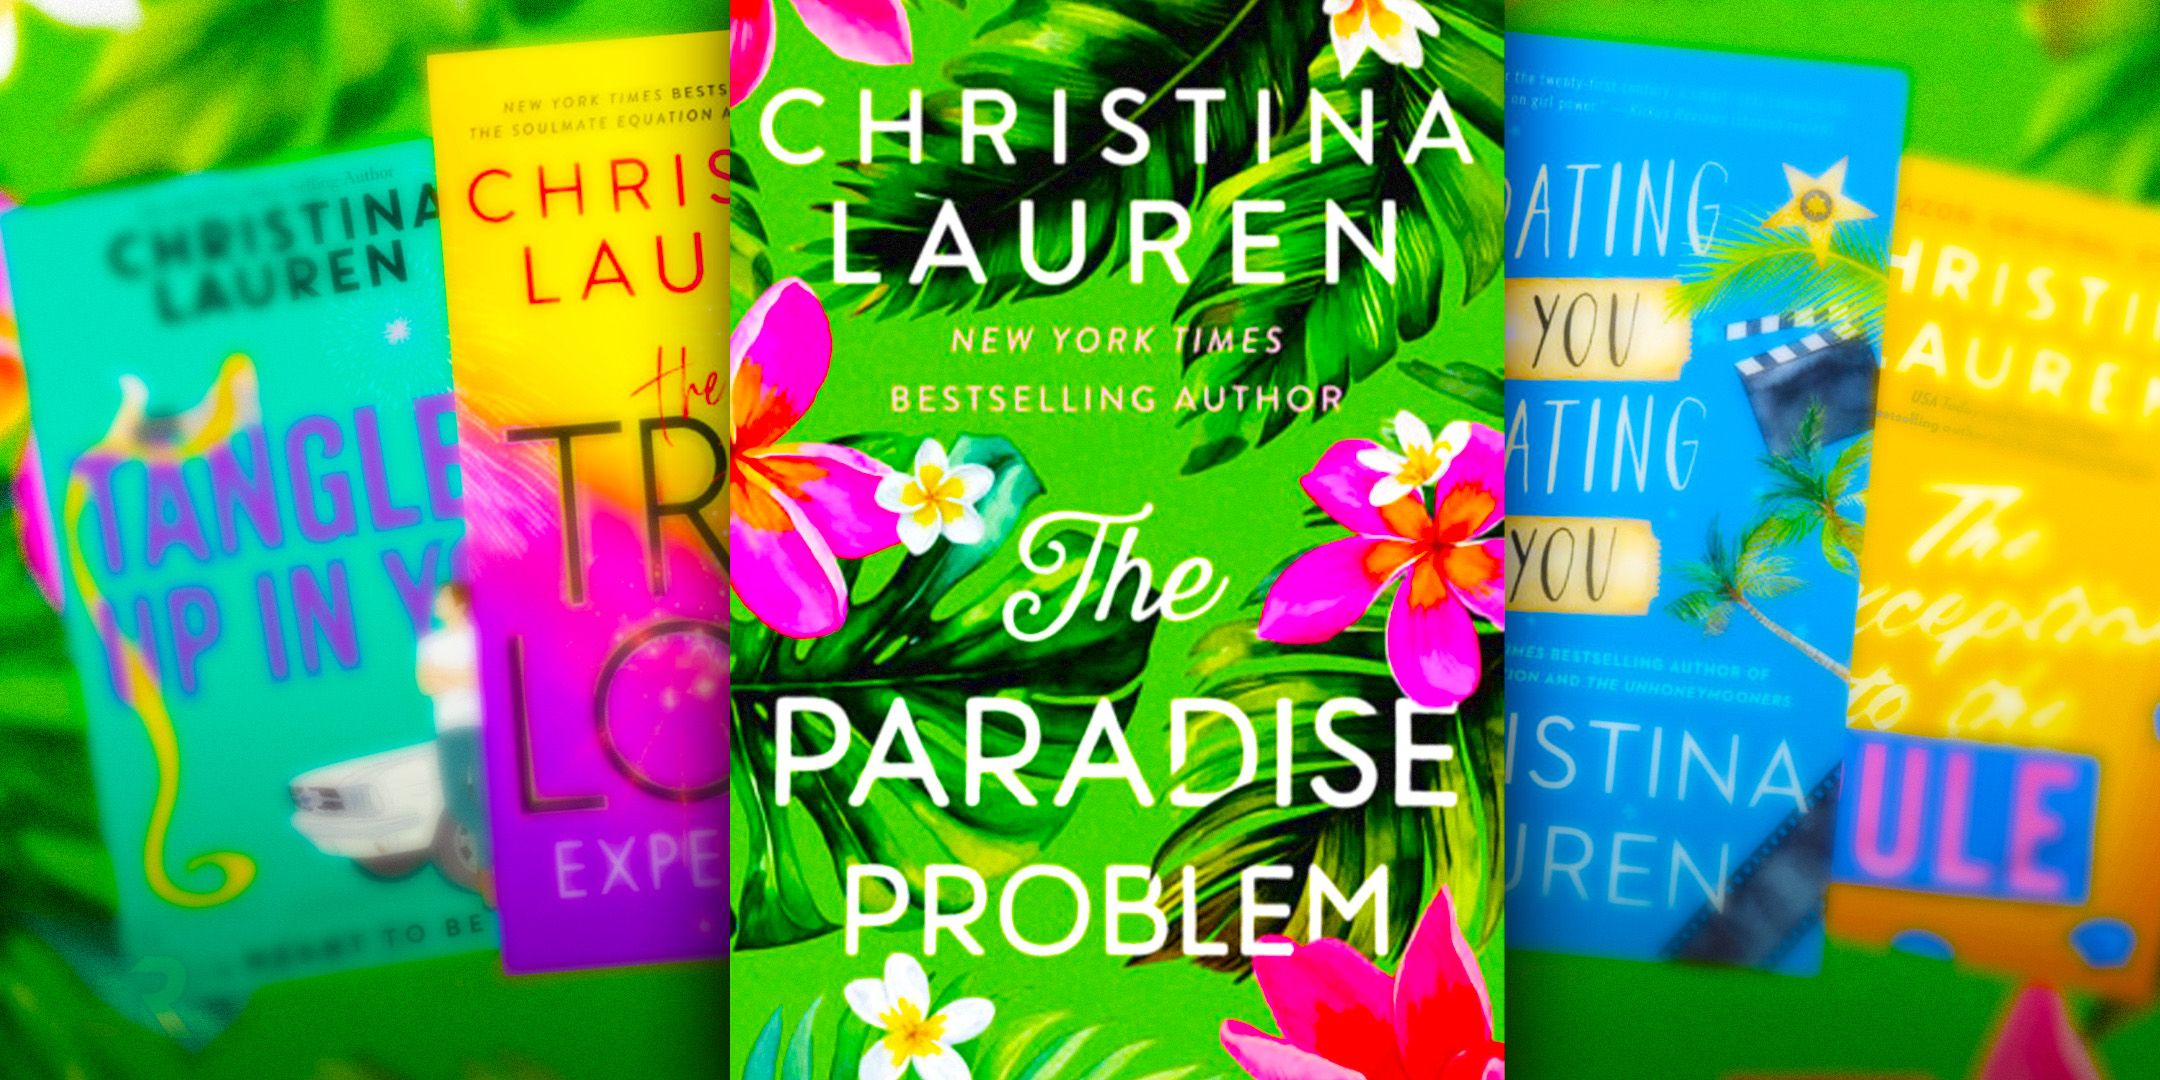 The cover of Christina Lauren's The Paradise Problem with their other books in the background